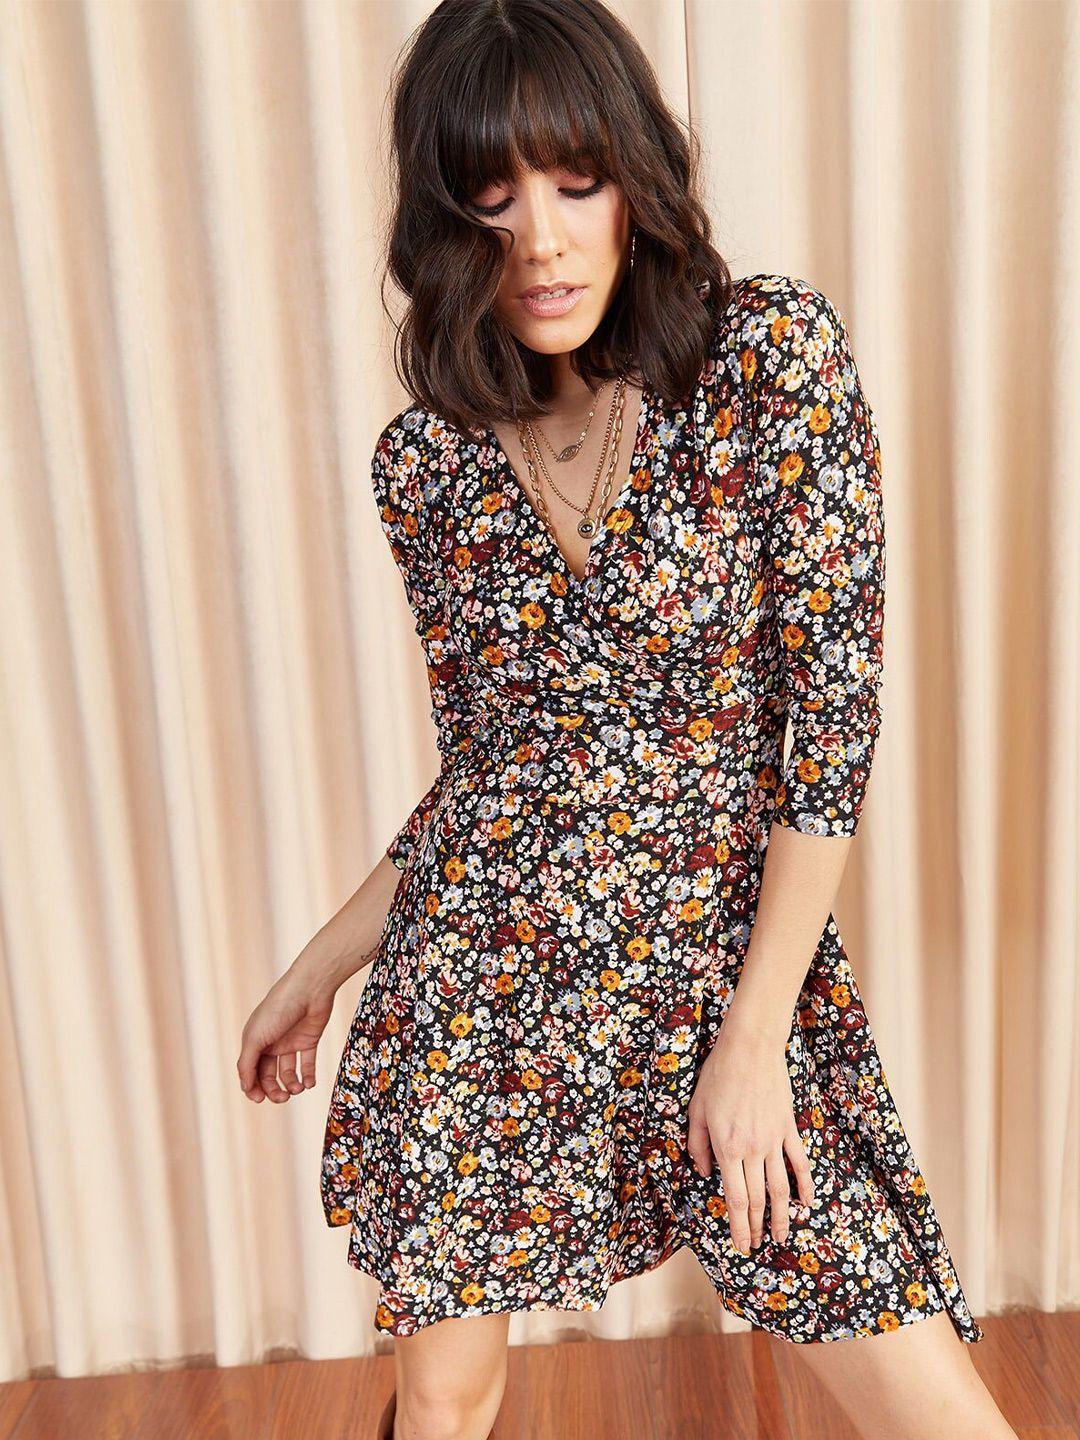 olalook floral printed v-neck fit and flare mini dress